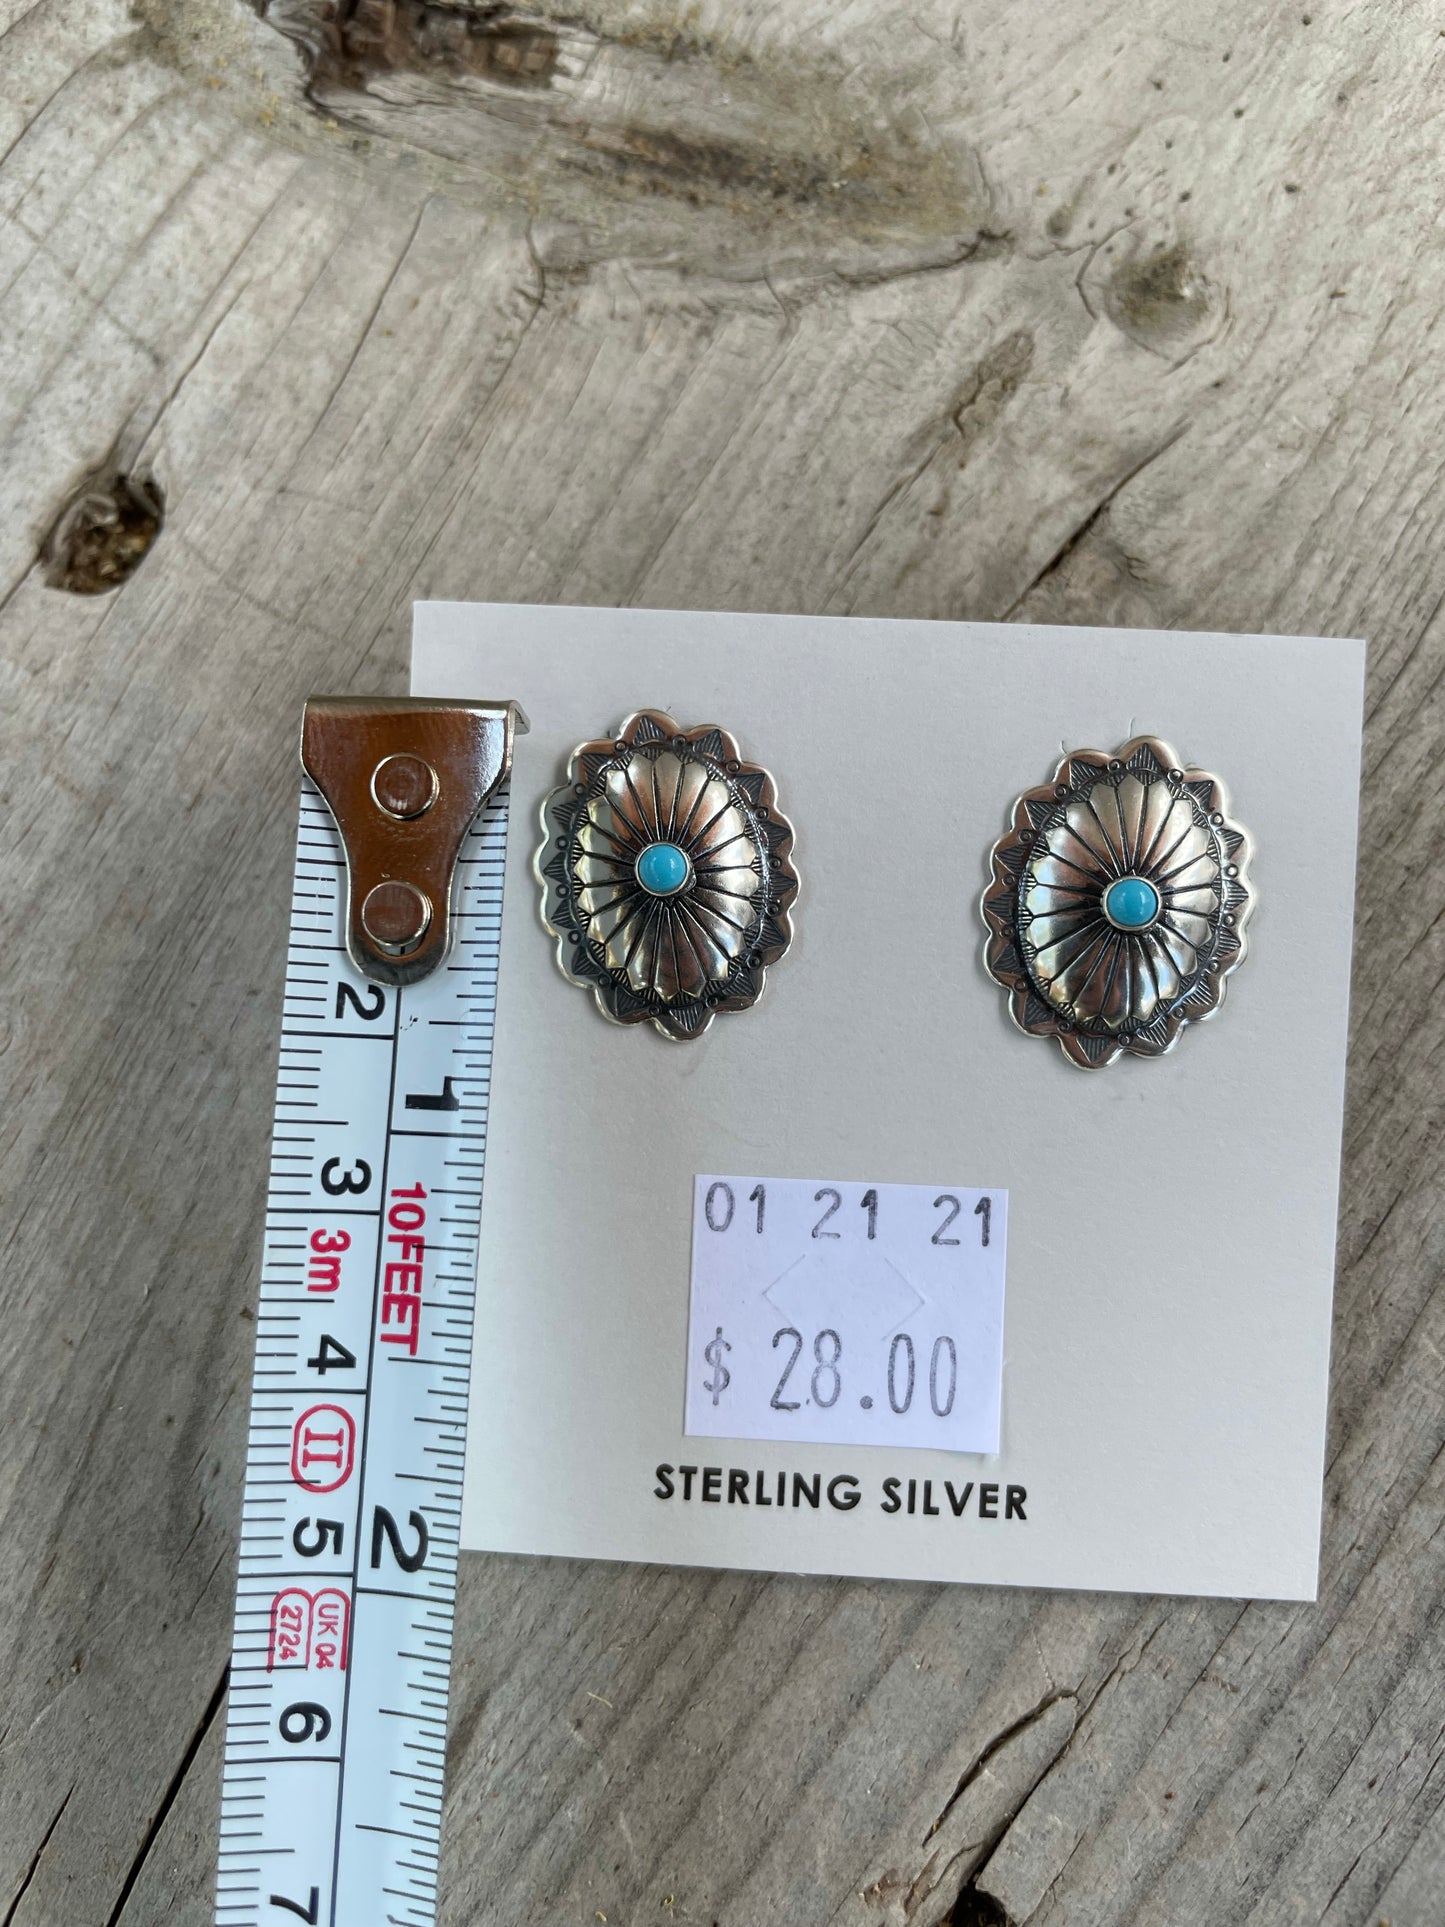 The Rustic Concho with Turquoise Medium Stud Earrings